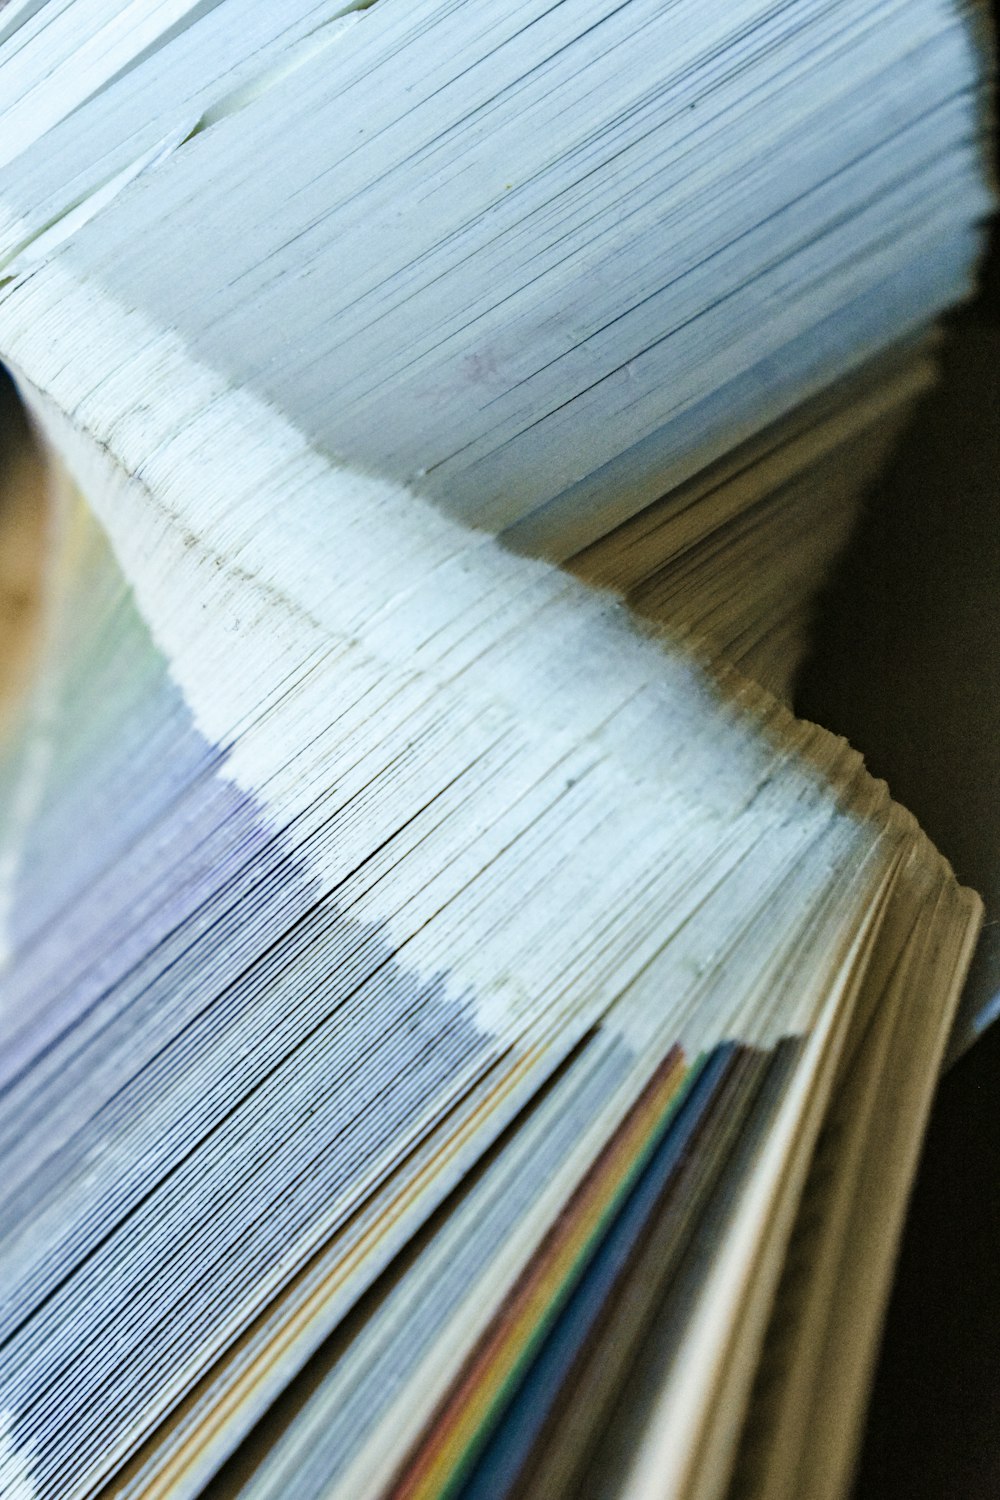 a close up of a stack of papers